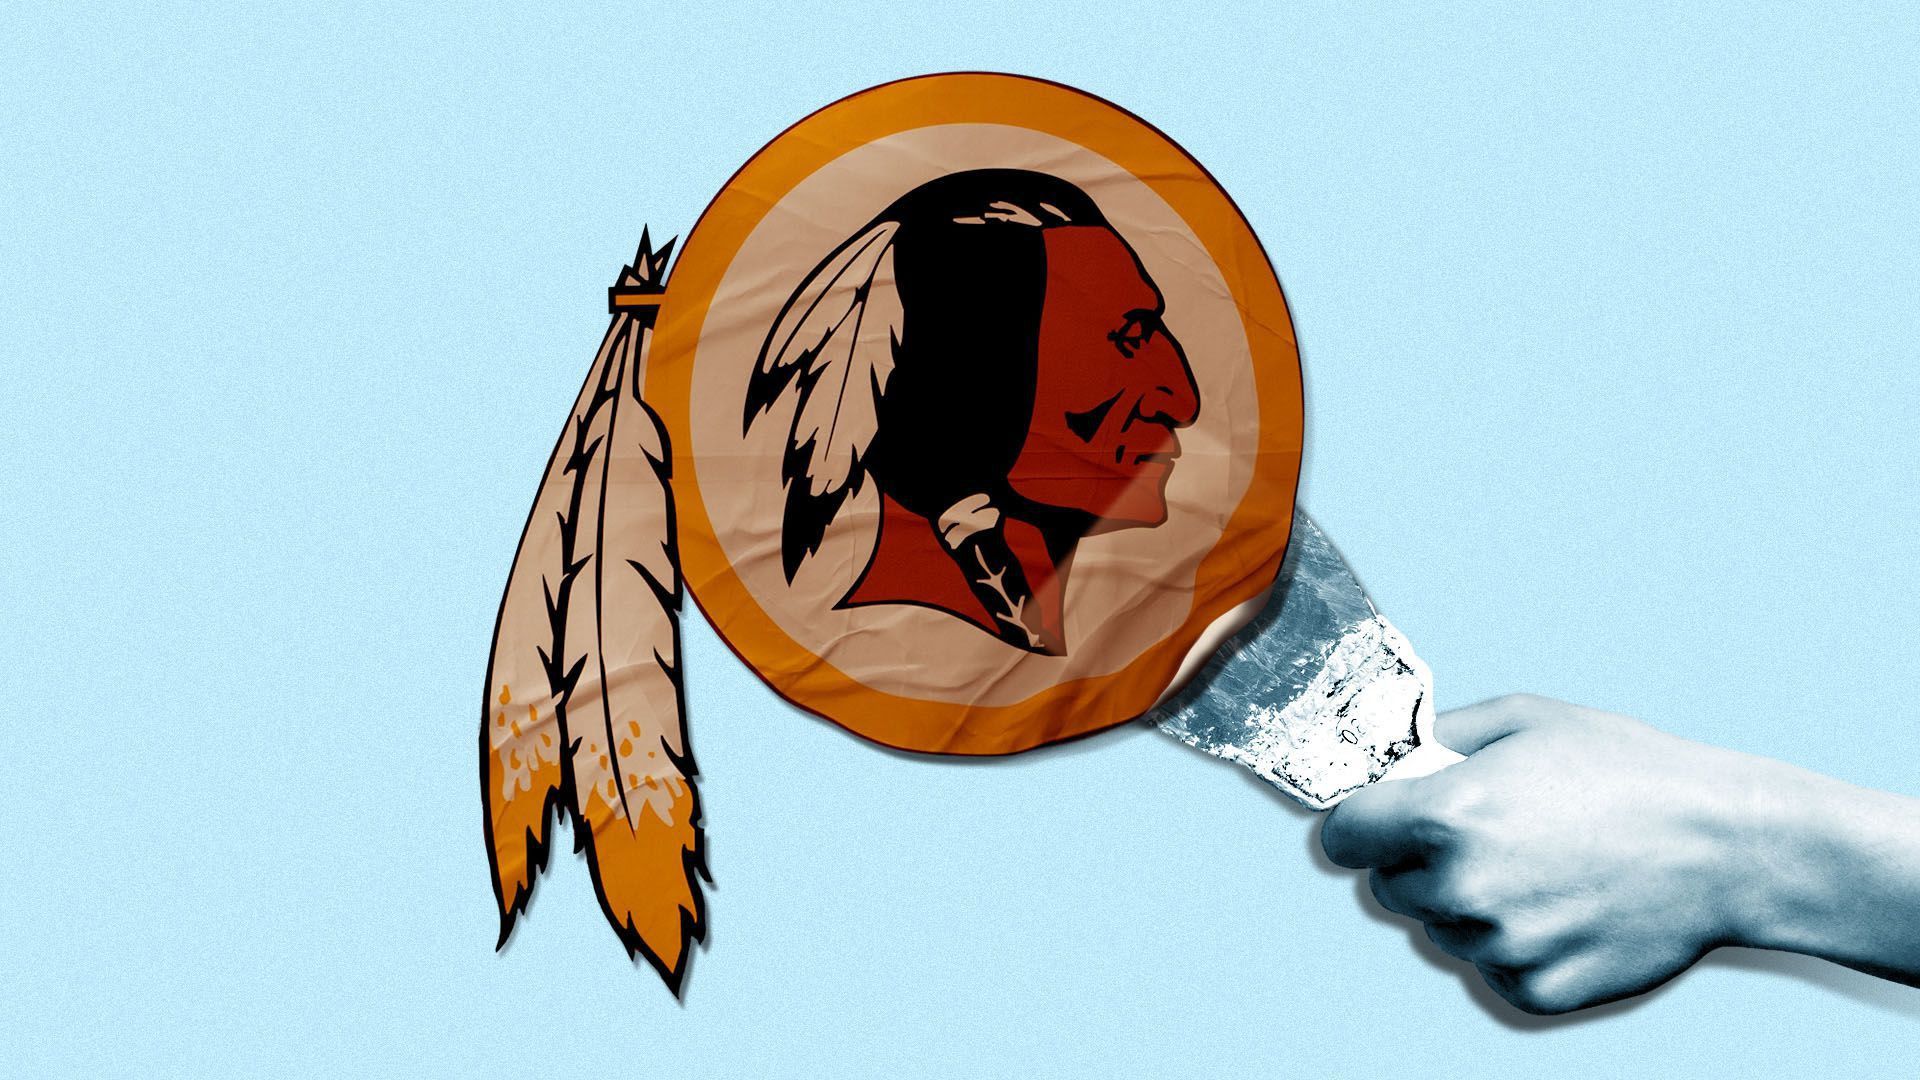 An illustration of the redskins logo being peeled off